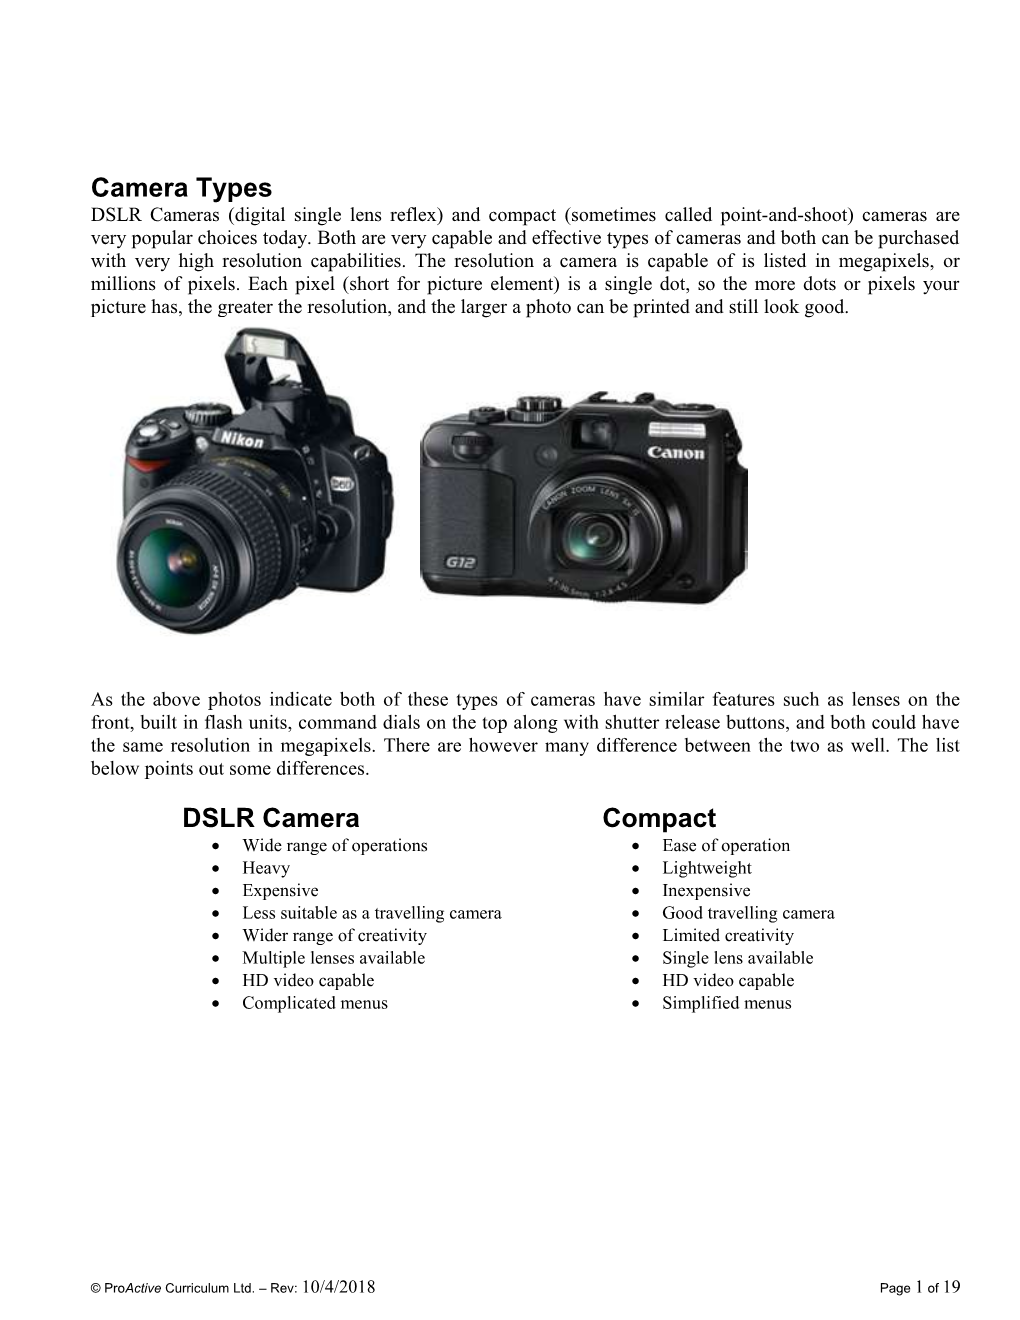 DSLR Cameras (Digital Single Lens Reflex) and Compact (Sometimes Called Point-And-Shoot)